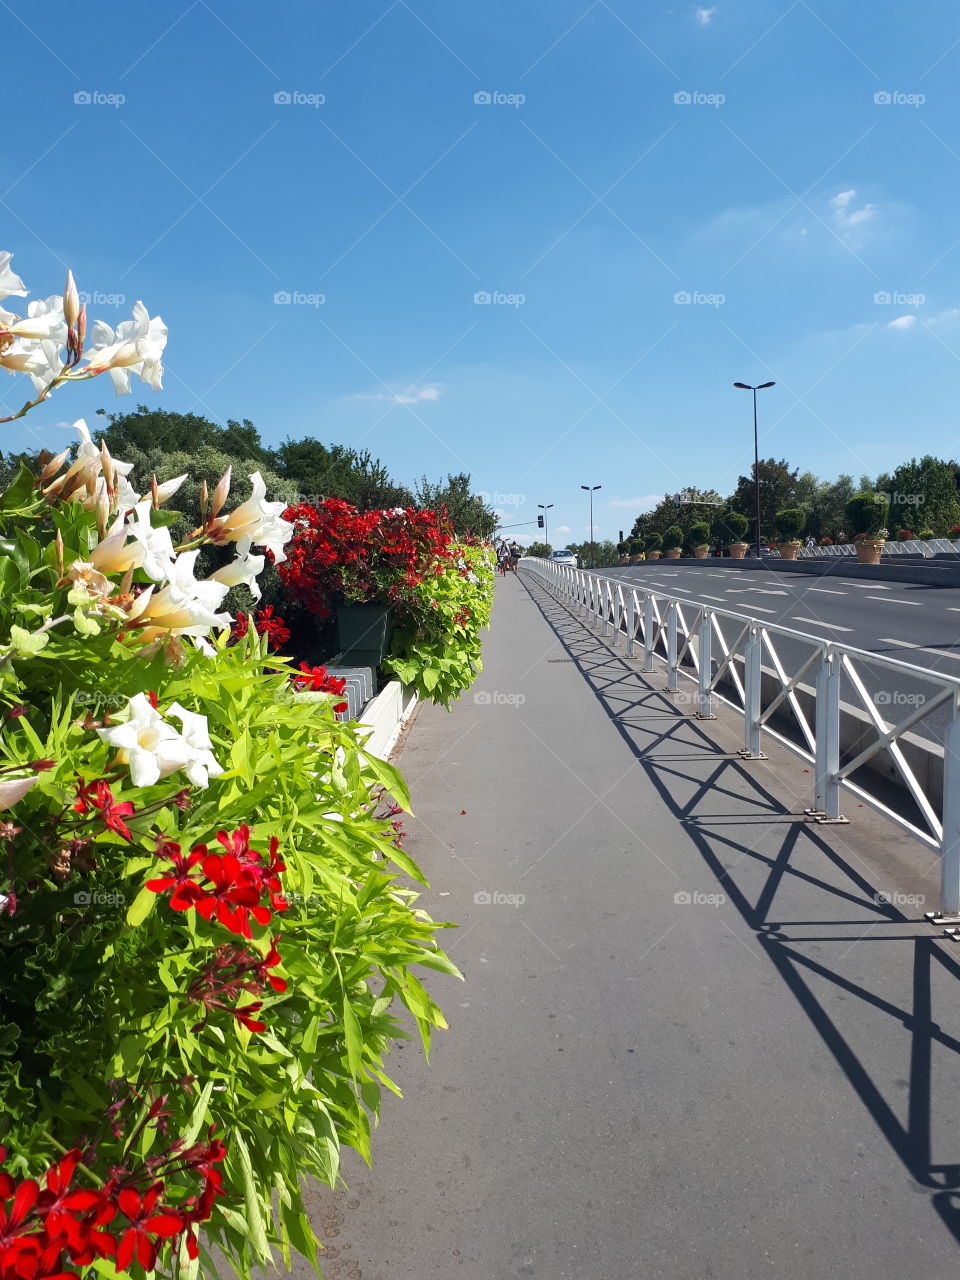 Bridge with white and red flowers